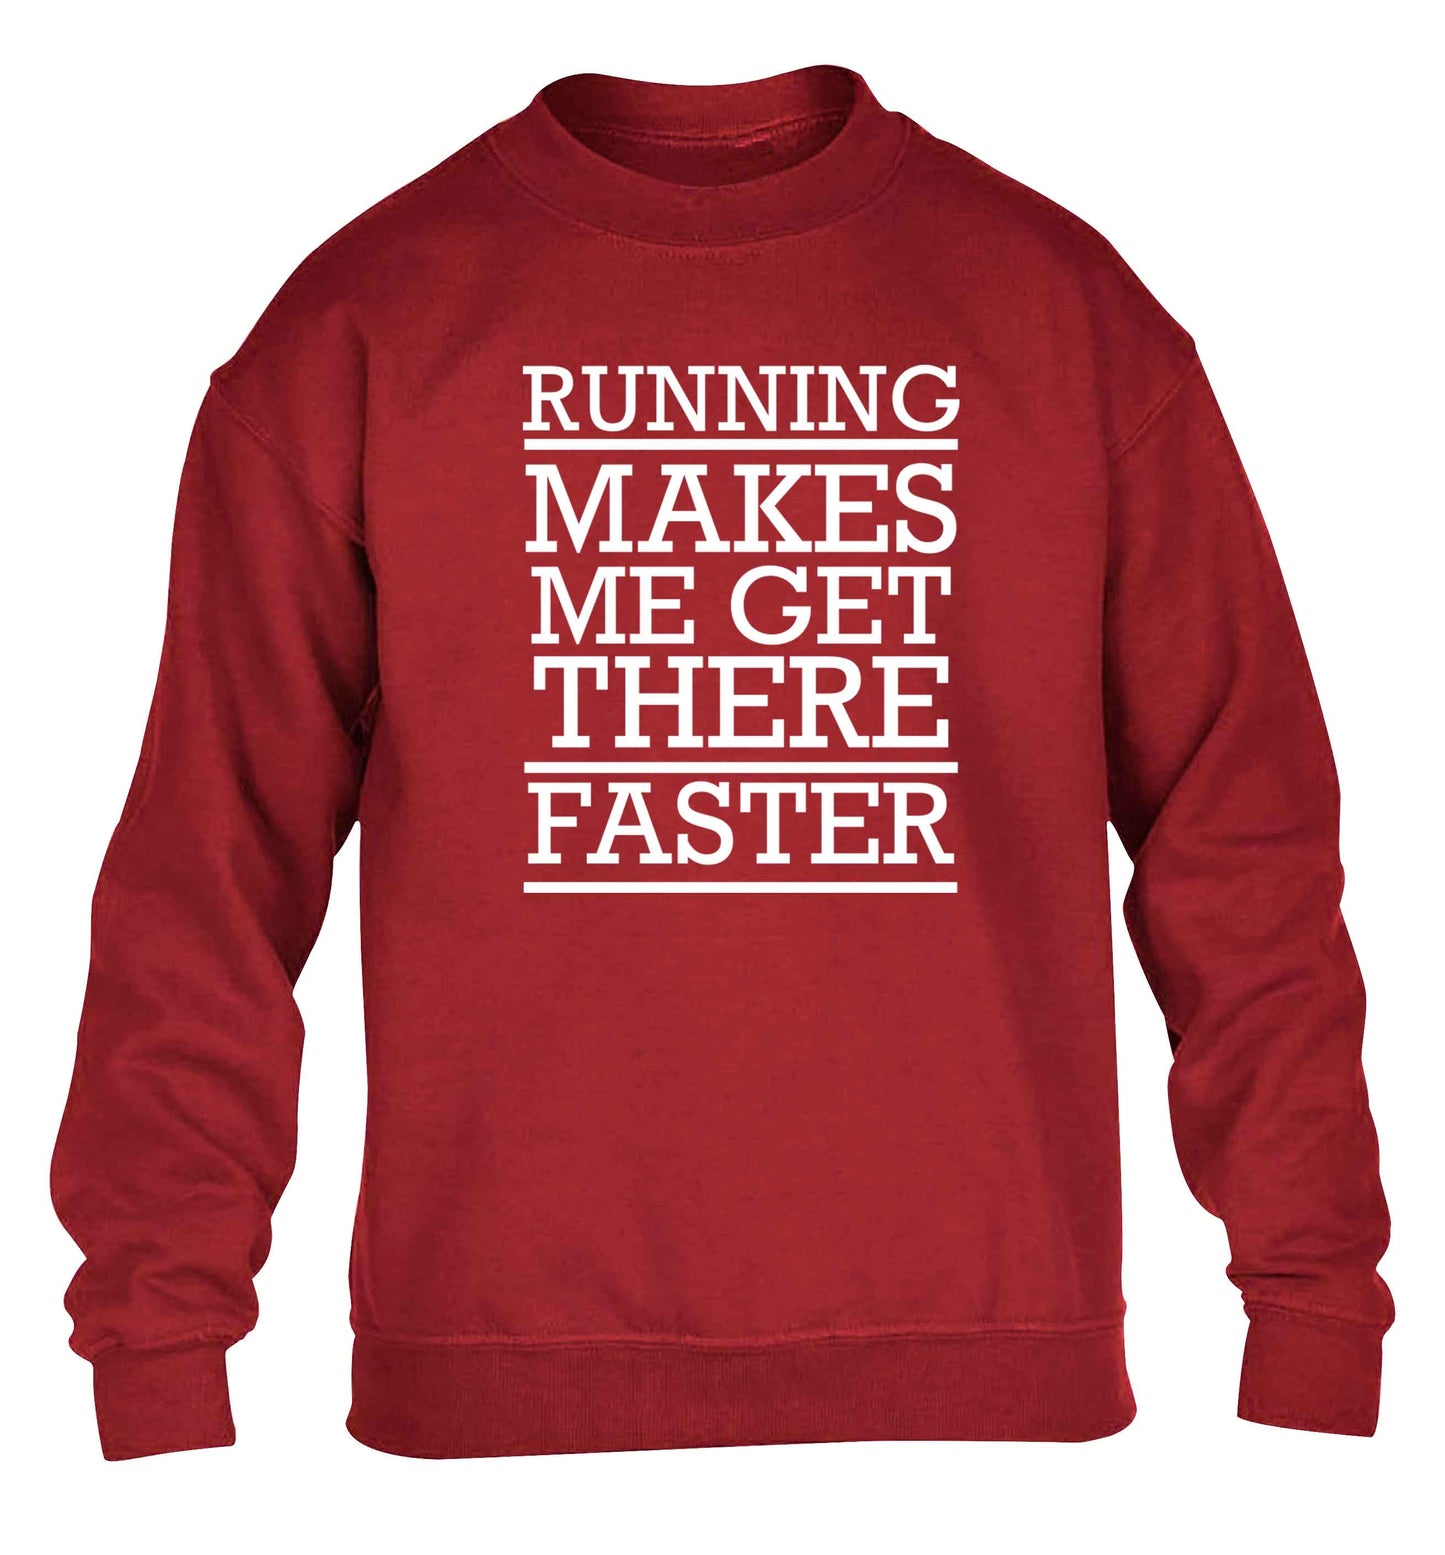 Running makes me get there faster children's grey sweater 12-13 Years